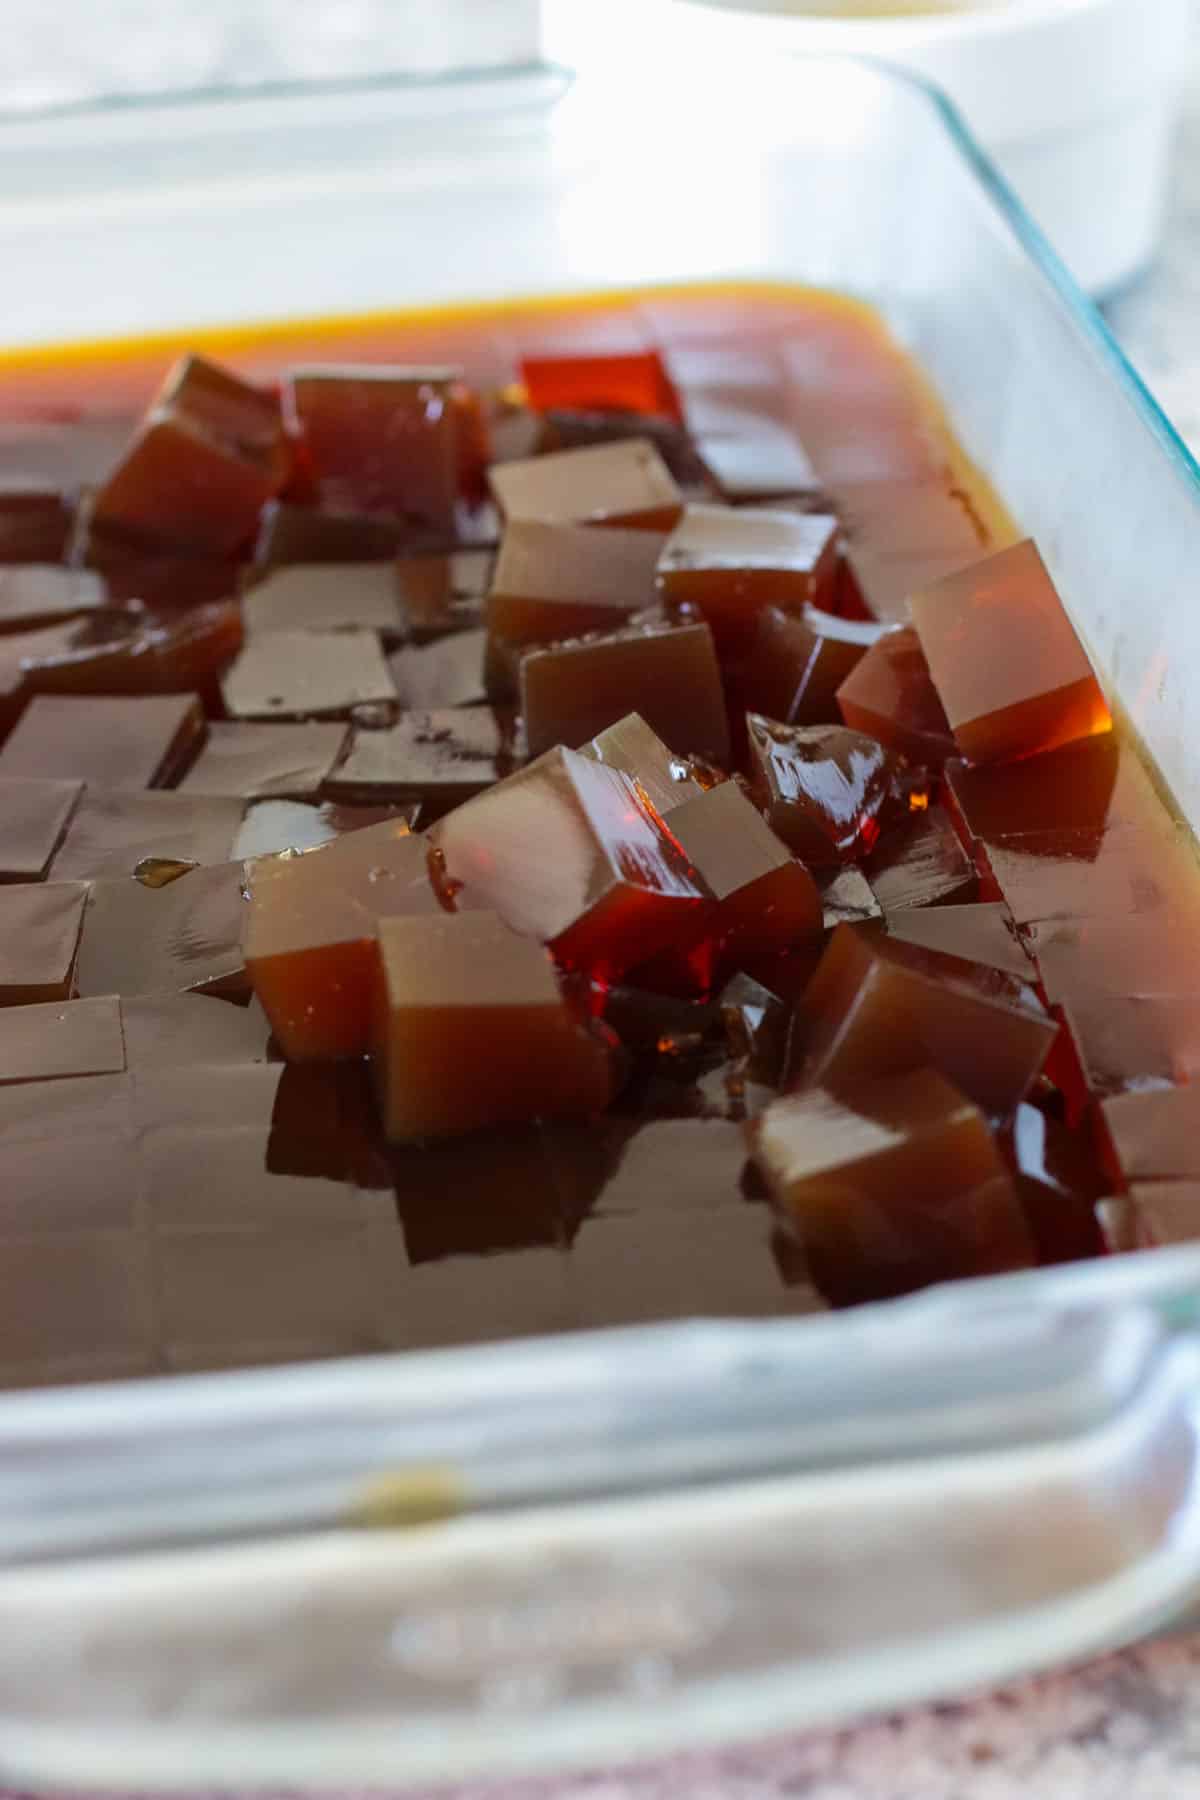 The cubed coffee jelly on a baking dish.